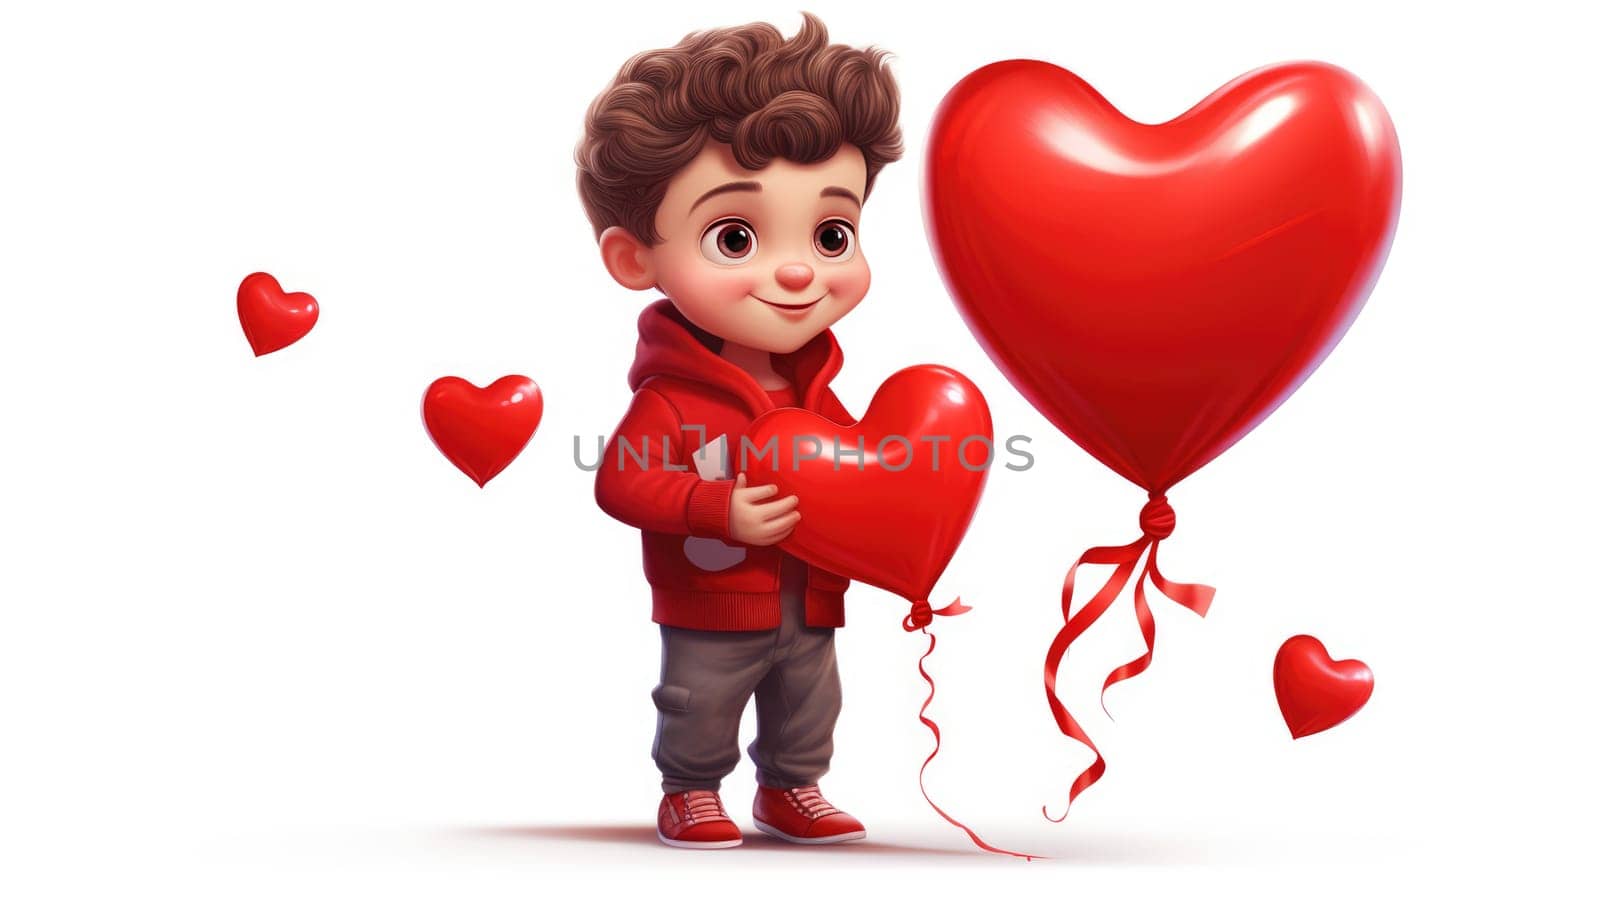 Lovely boy holding red heart, over white background. Love concept. Valentines day.